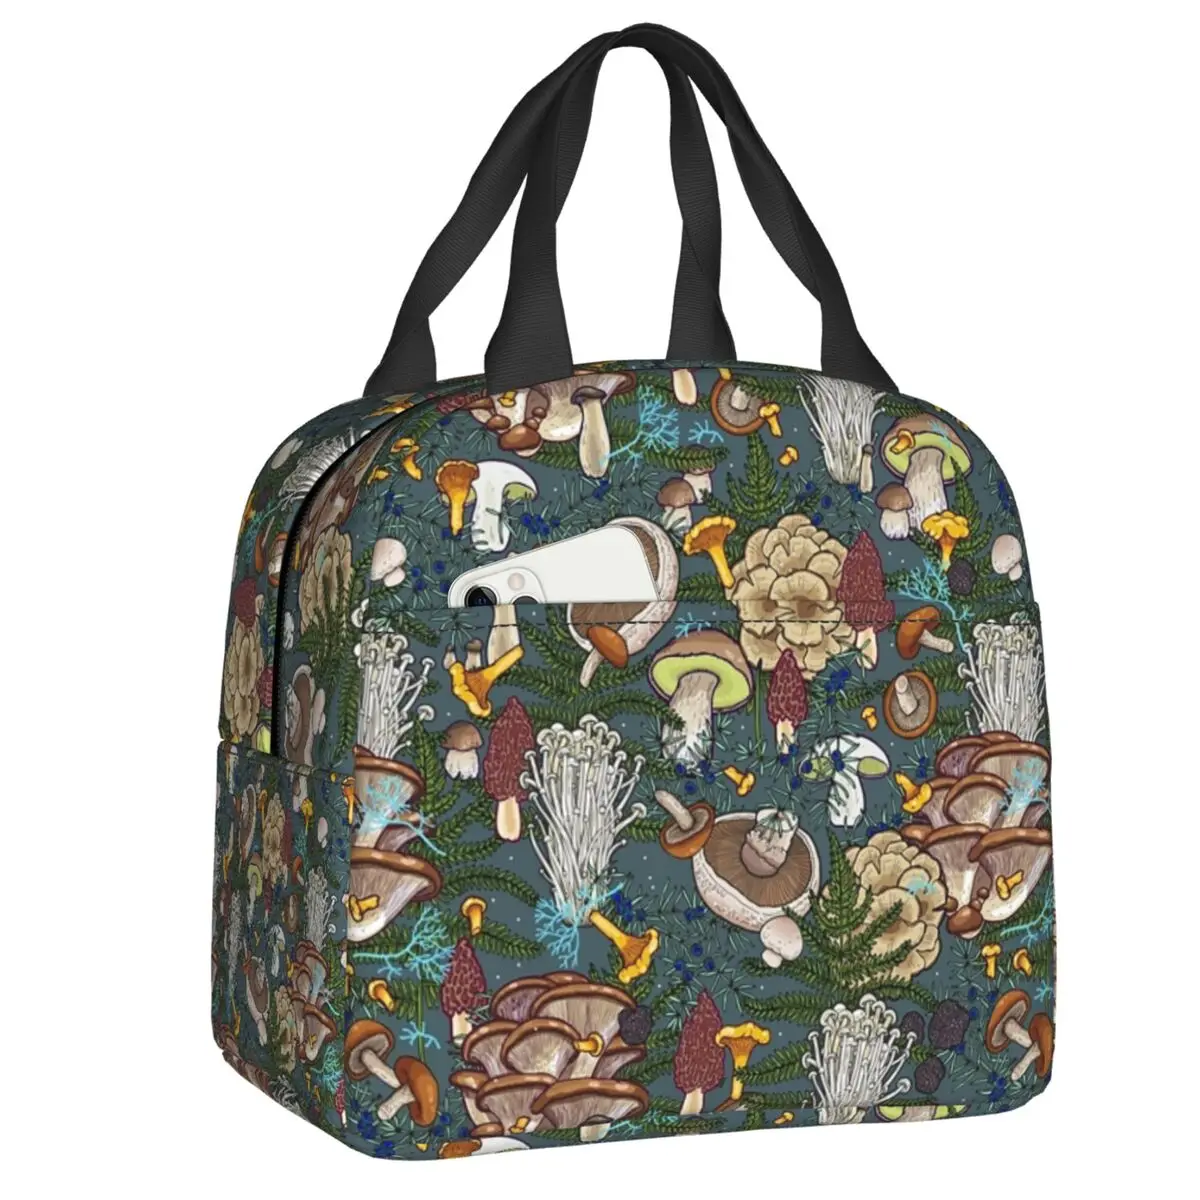 

Mushroom Forest Insulated Lunch Bag for Women Leakproof Thermal Cooler Bento Box Office Picnic Travel